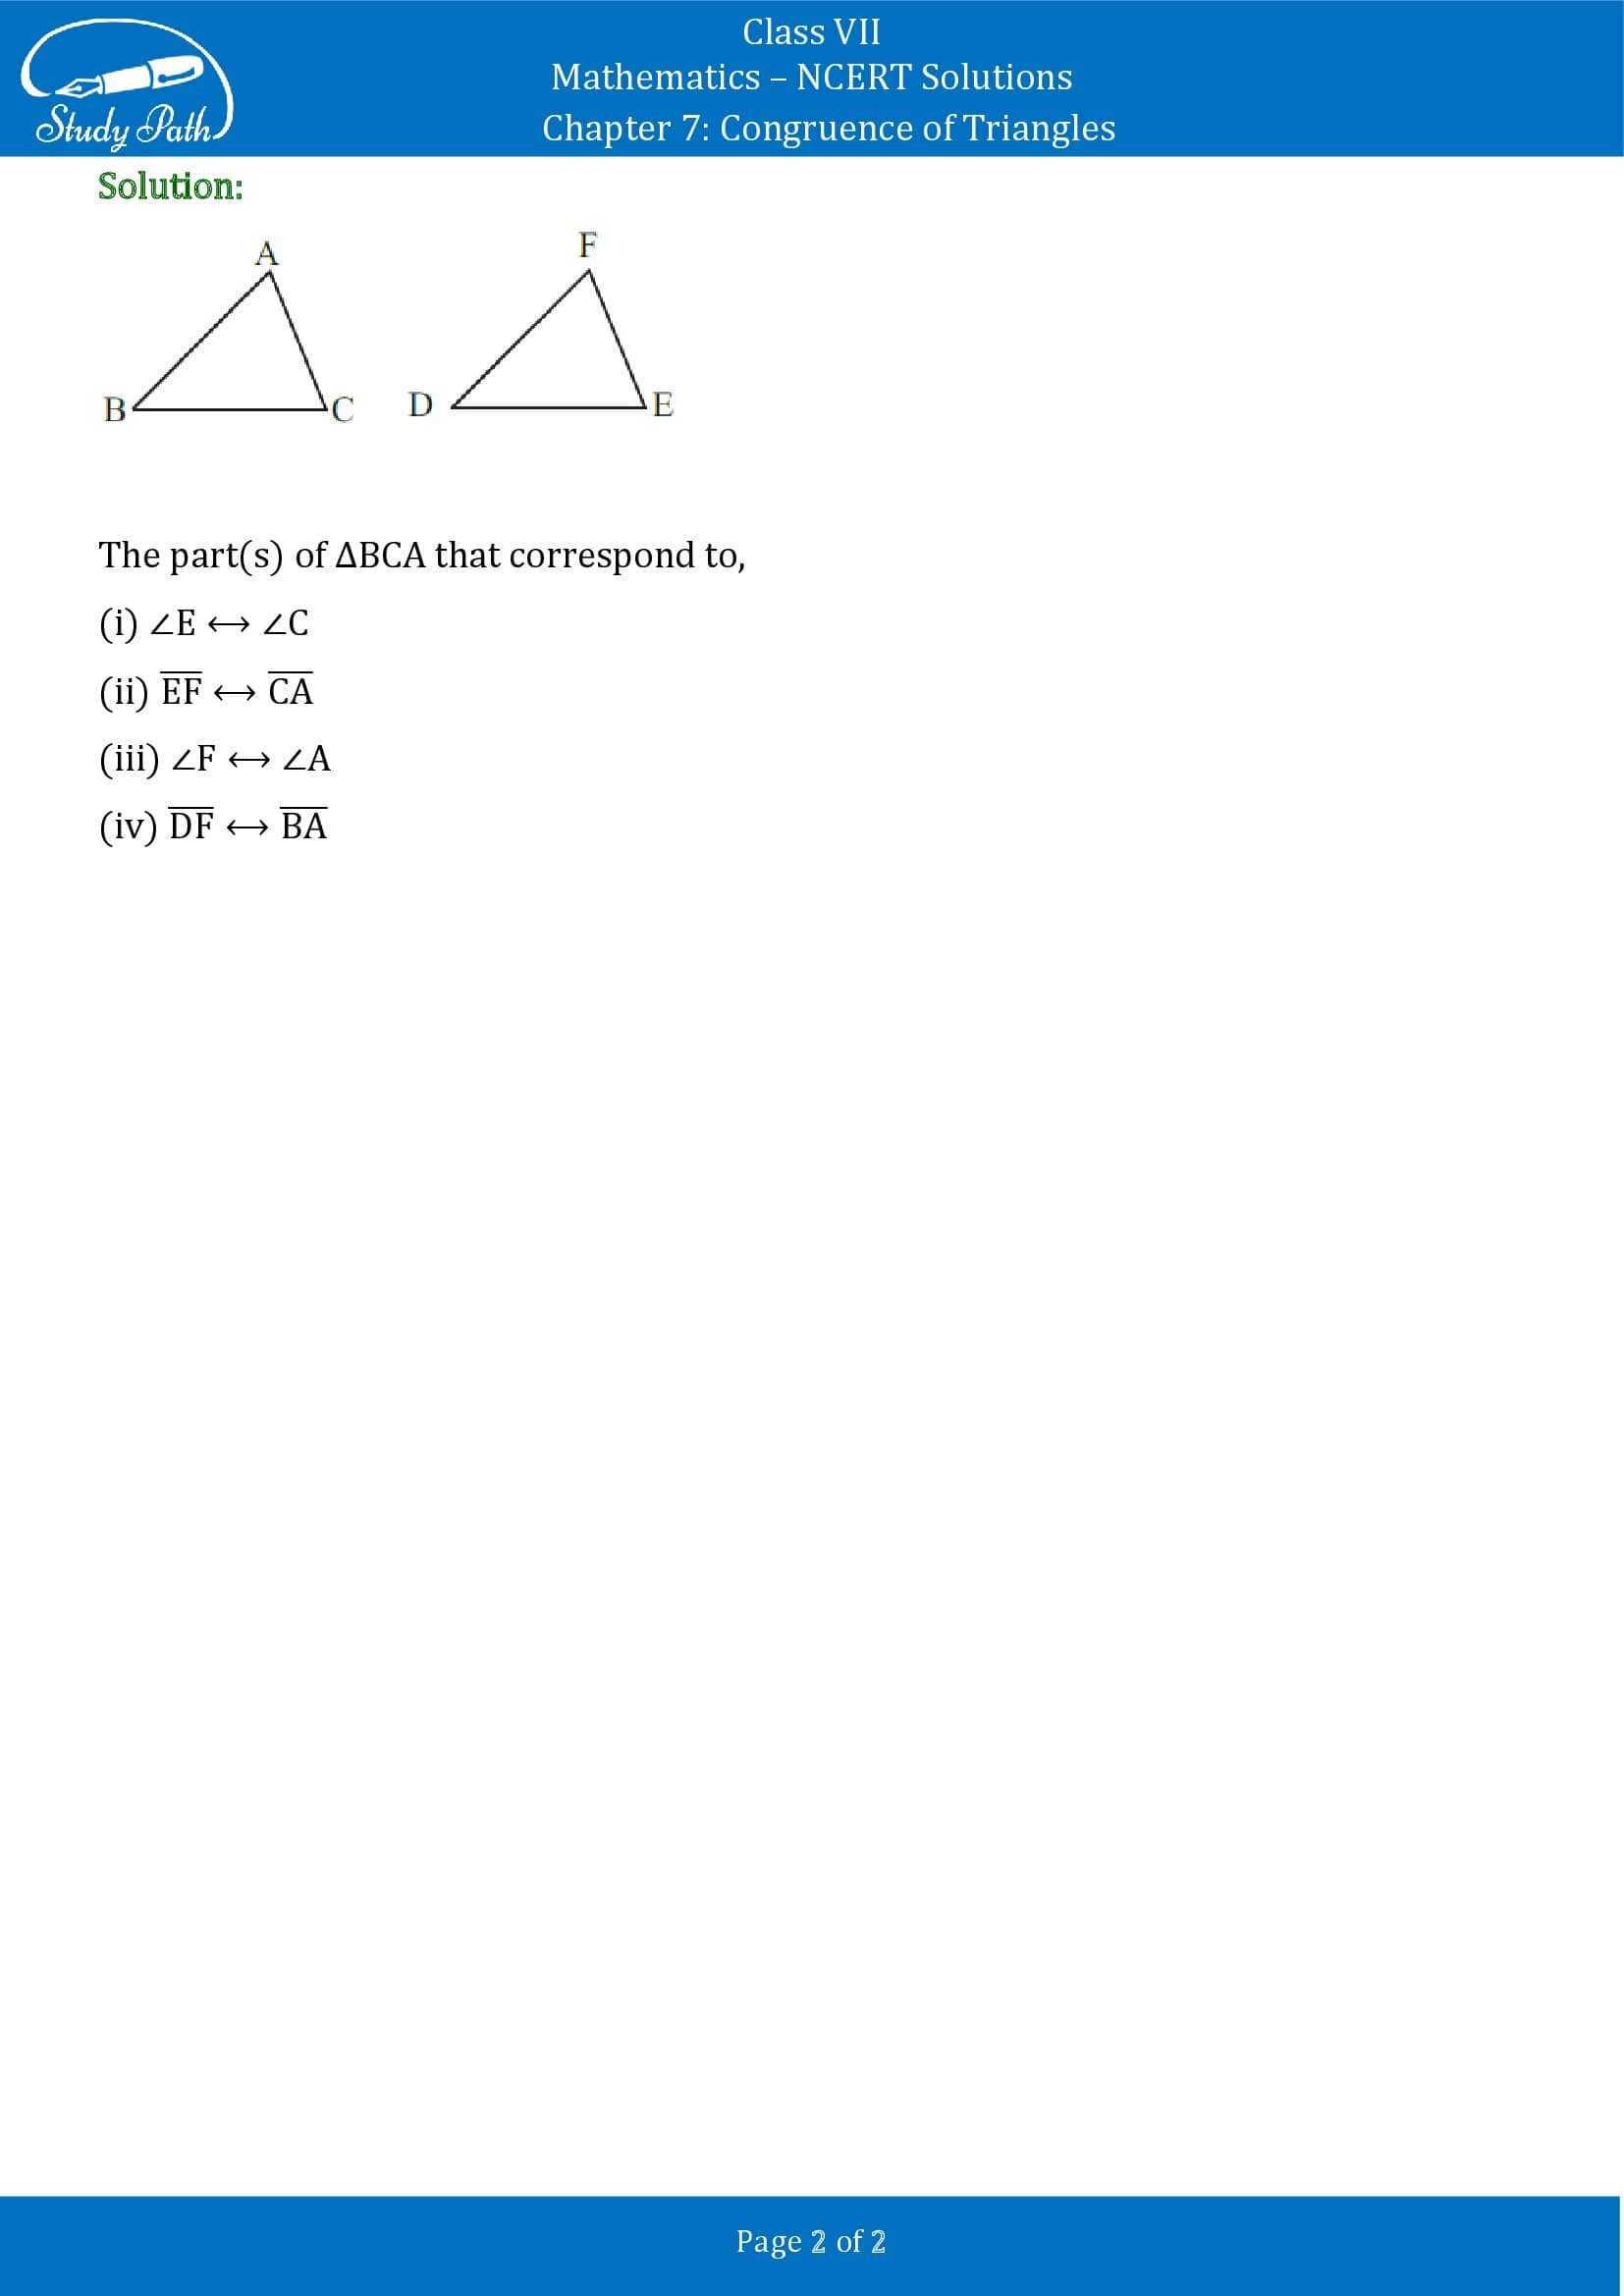 NCERT Solutions for Class 7 Maths Chapter 7 Congruence of Triangles Exercise 7.1 00002